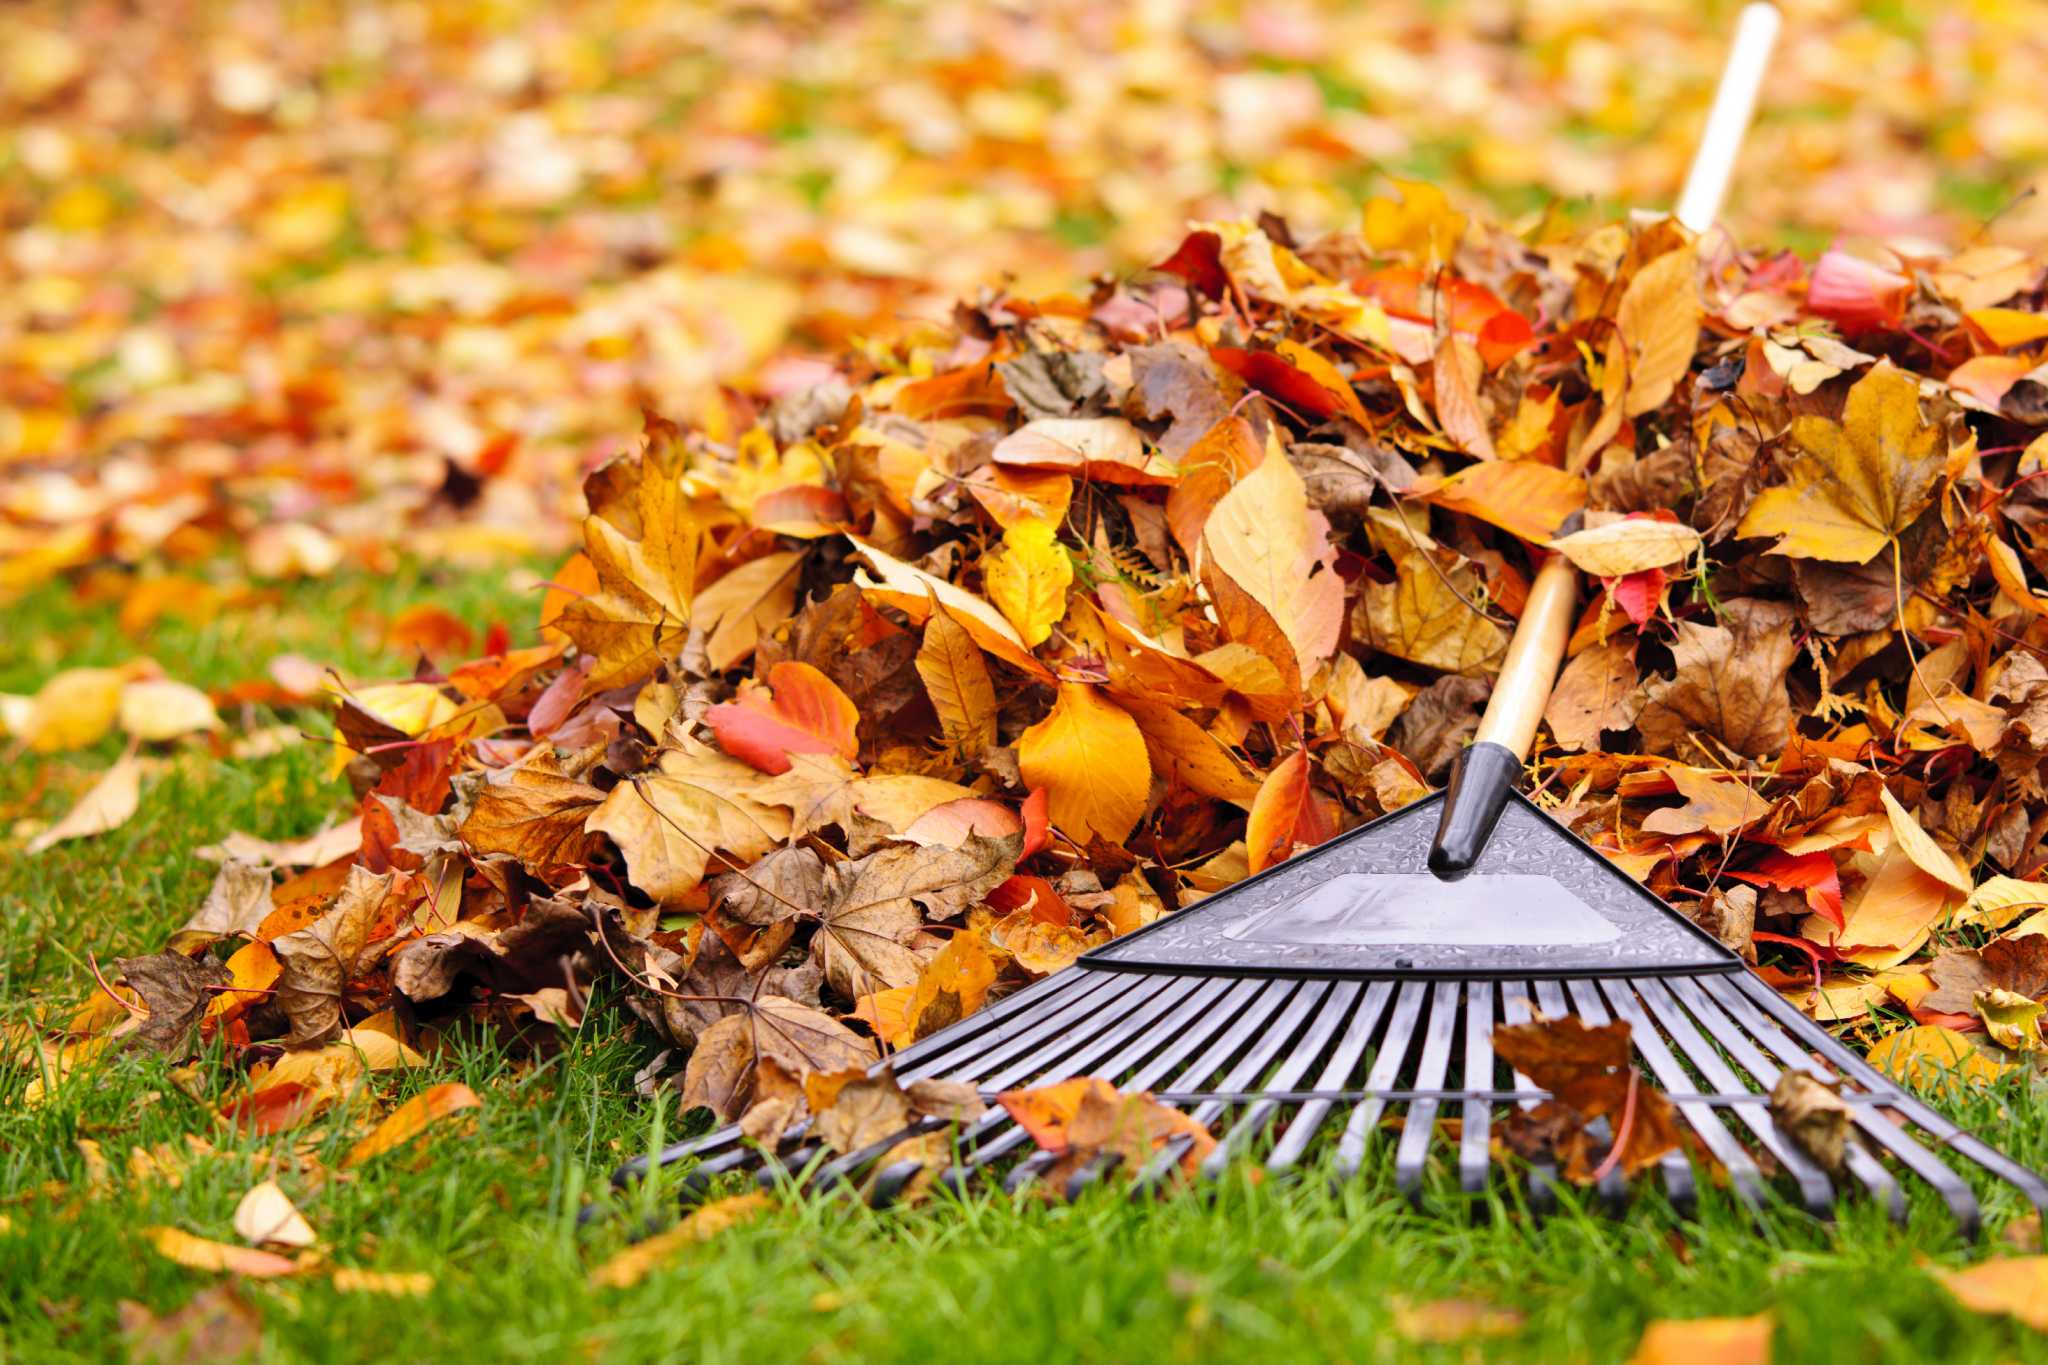 Preparing your lawn for winter